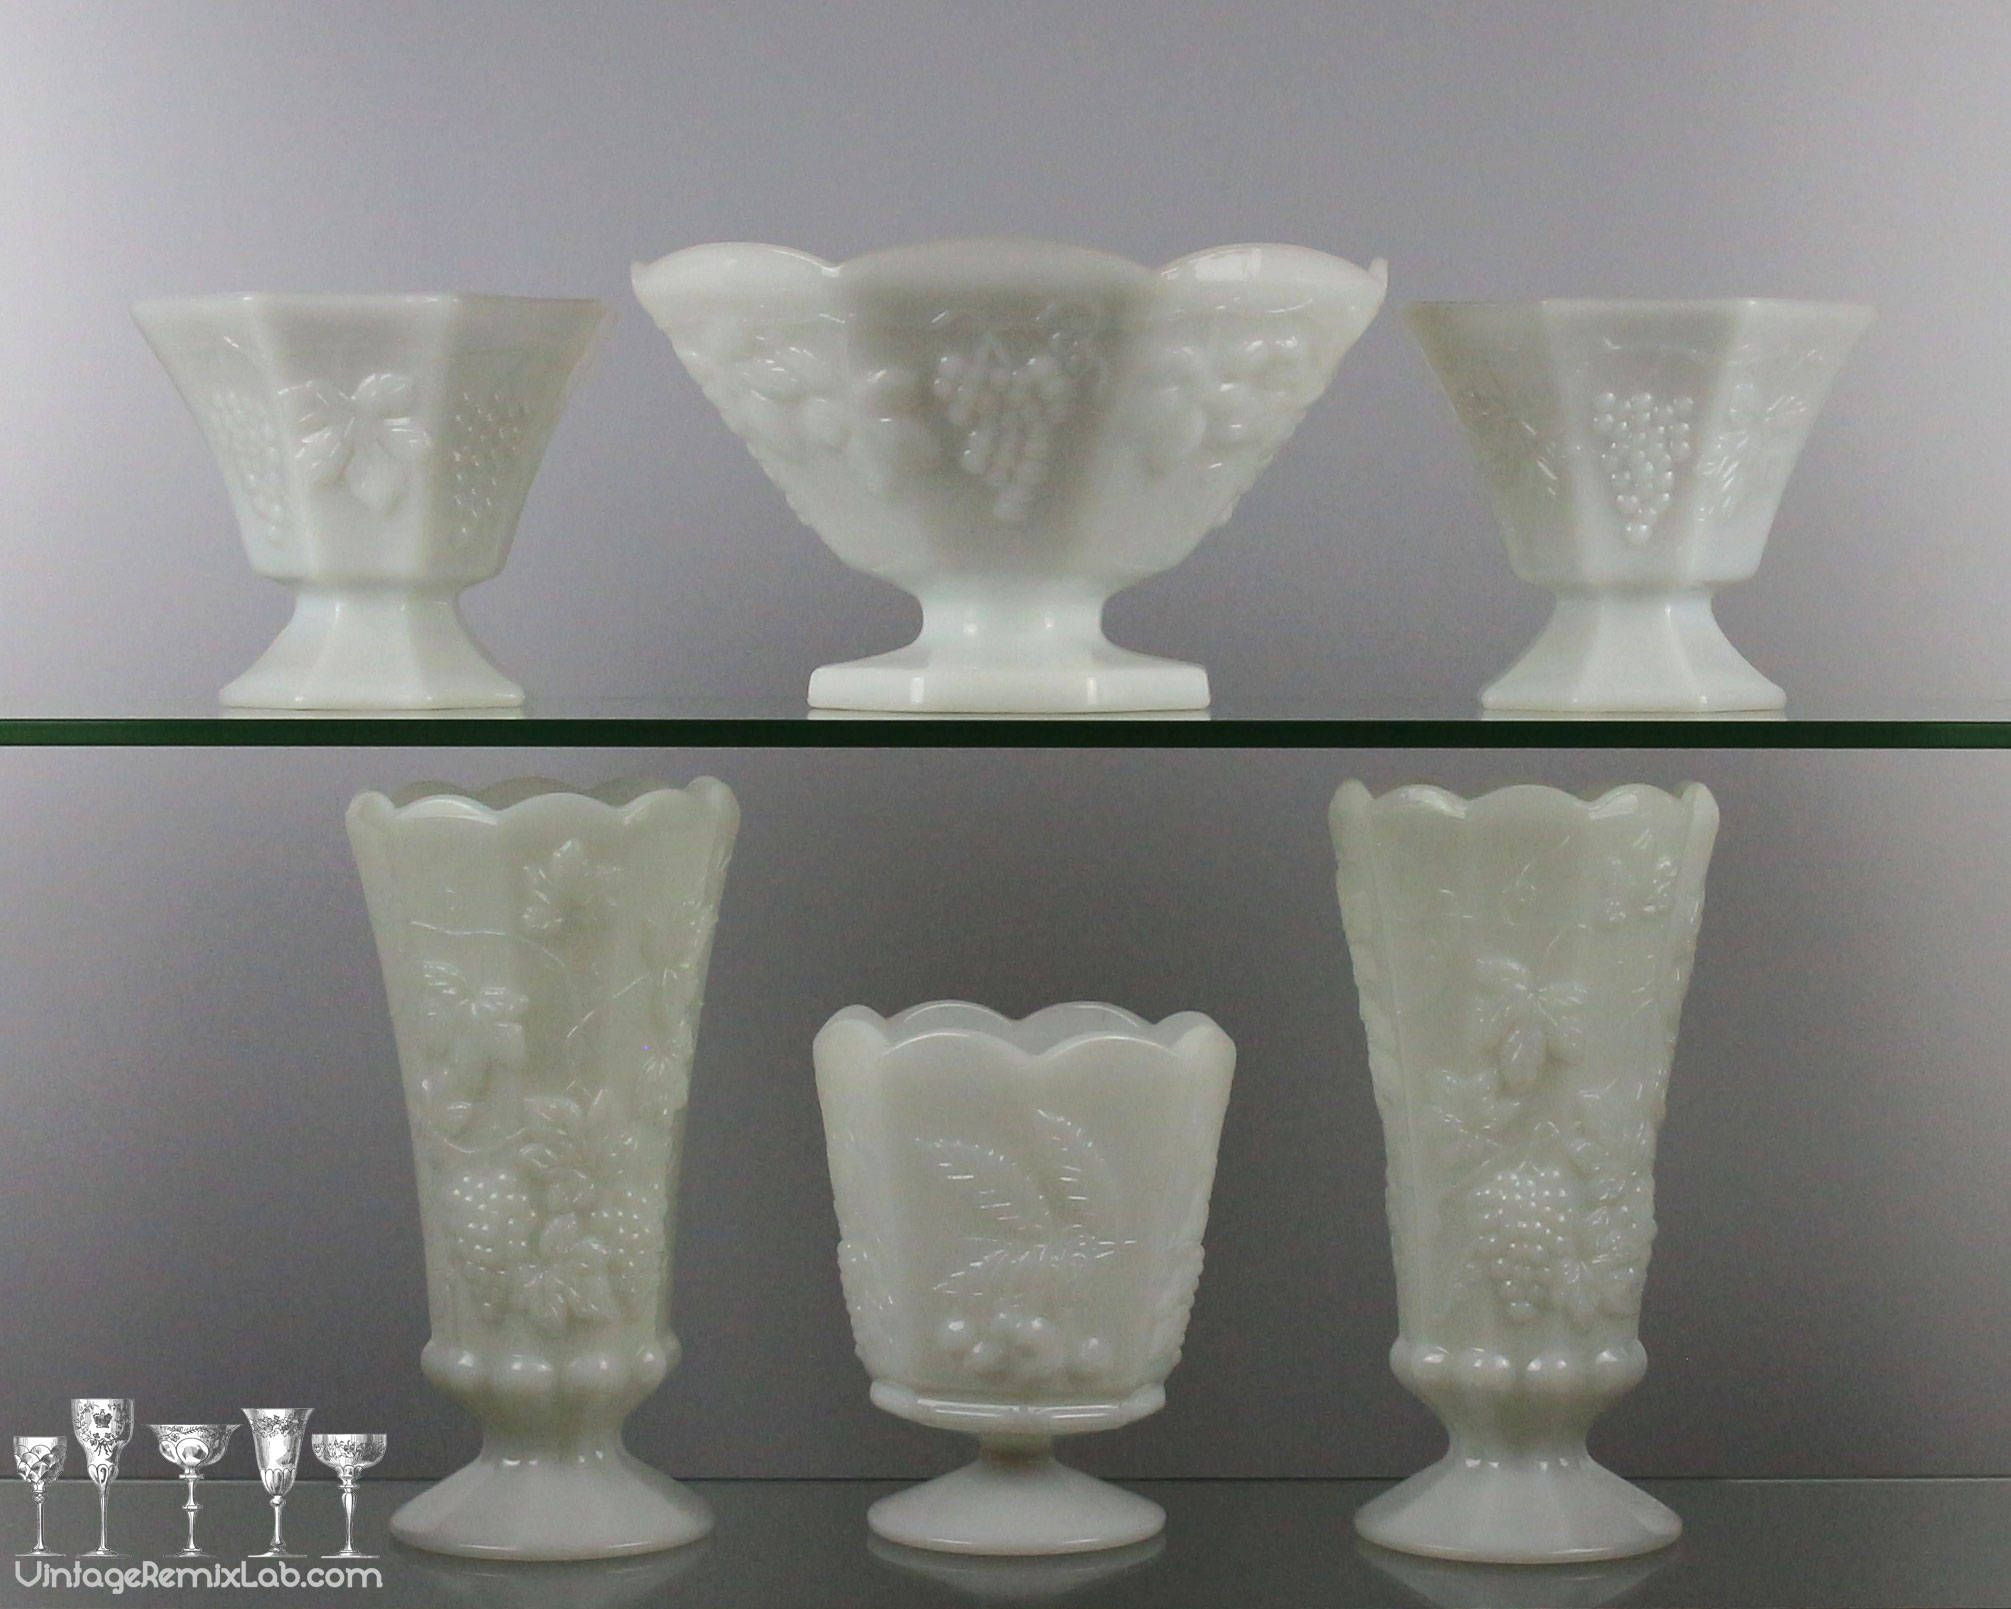 23 Lovely Footed Crystal Vase 2024 free download footed crystal vase of glass pedestal vases photos vintage 1950s milk glass pedestal vases throughout glass pedestal vases photos vintage 1950s milk glass pedestal vases e280a2 paneled grape